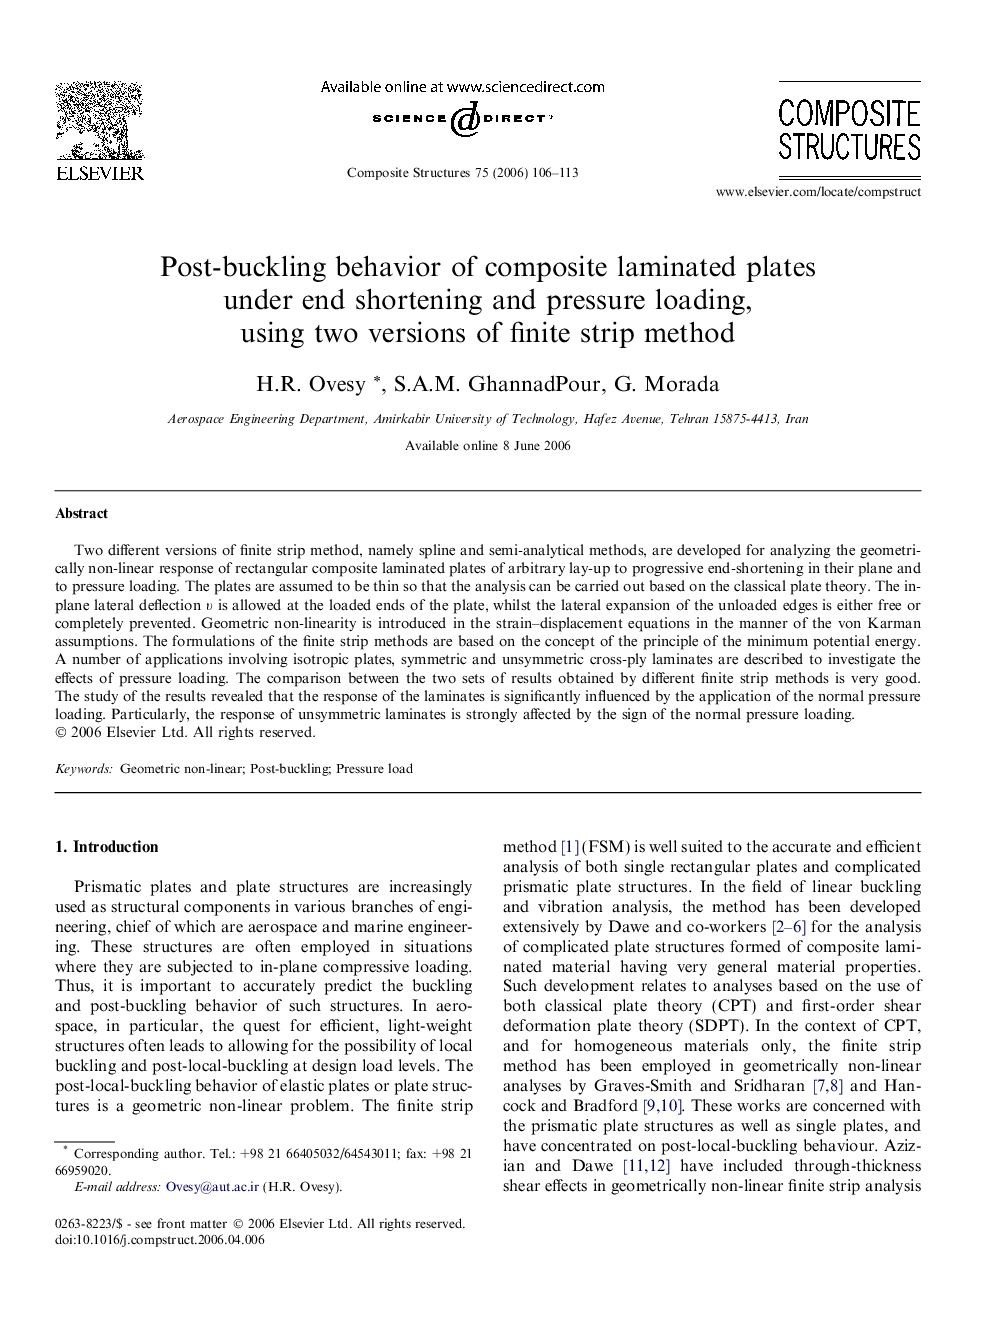 Post-buckling behavior of composite laminated plates under end shortening and pressure loading, using two versions of finite strip method